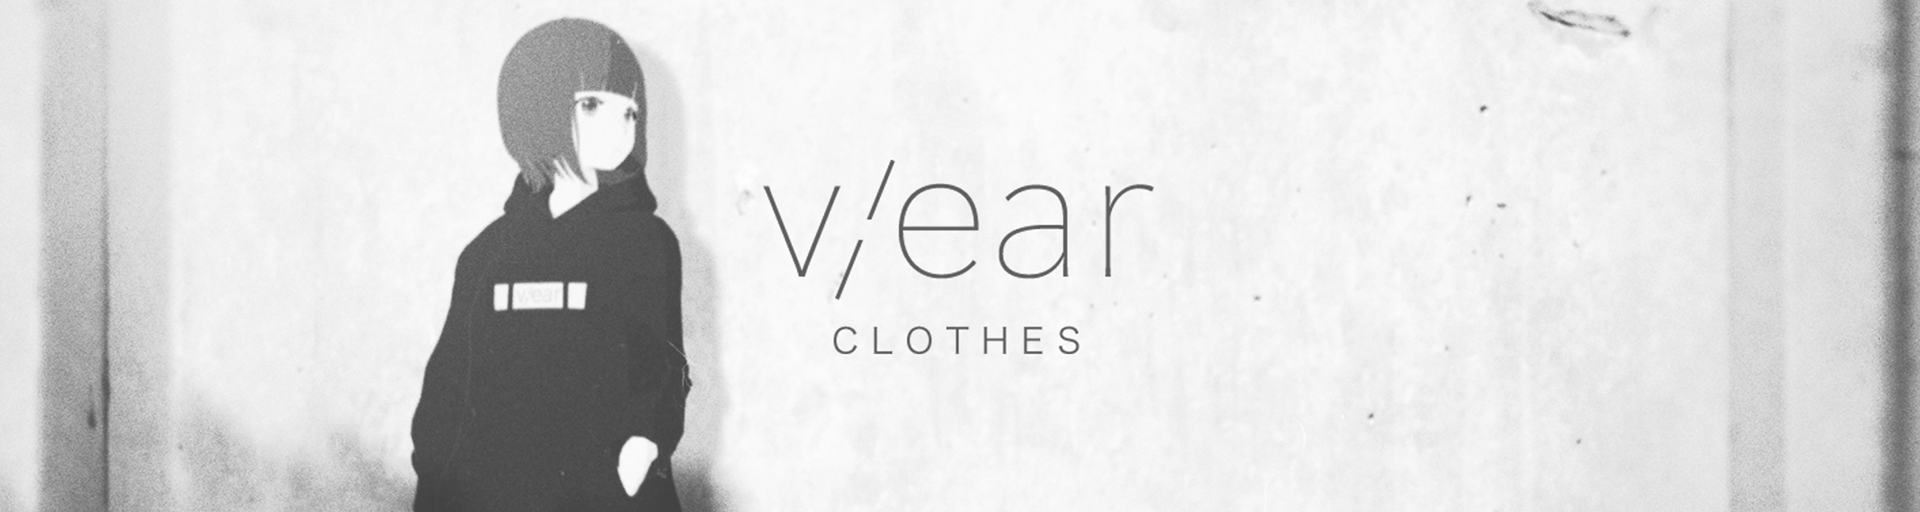 #vear_clothes